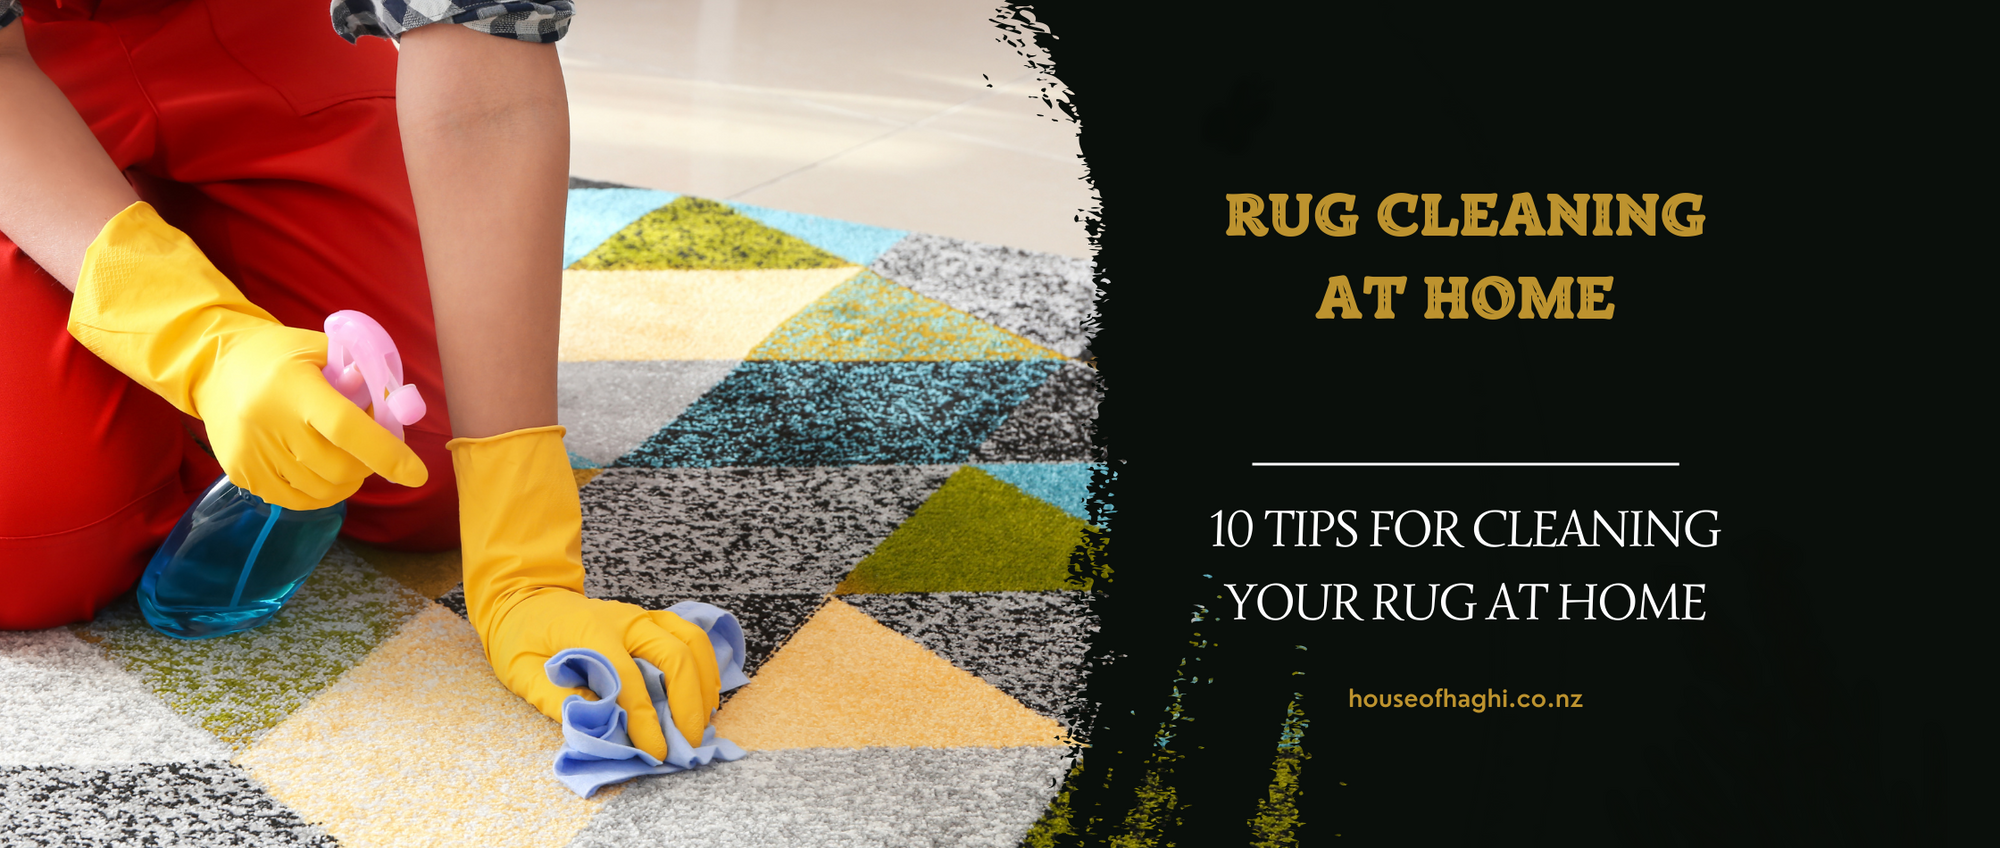 10 Tips for Cleaning Your Rug at Home